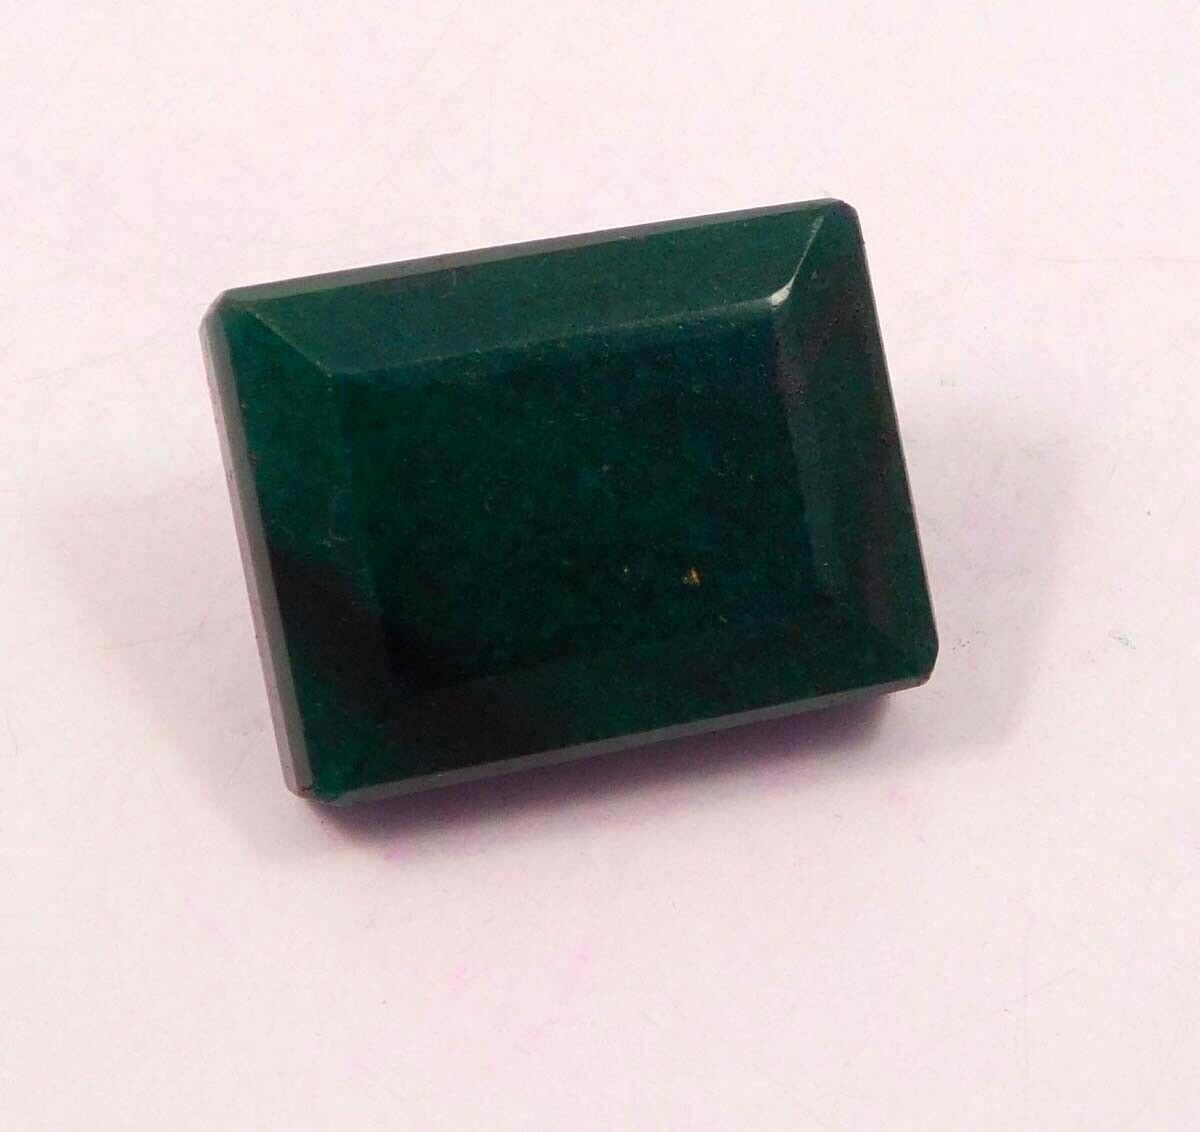 69 Cts. Natural Dyed Square Faceted Green Emerald Cut Loose Gemstone Rm13150